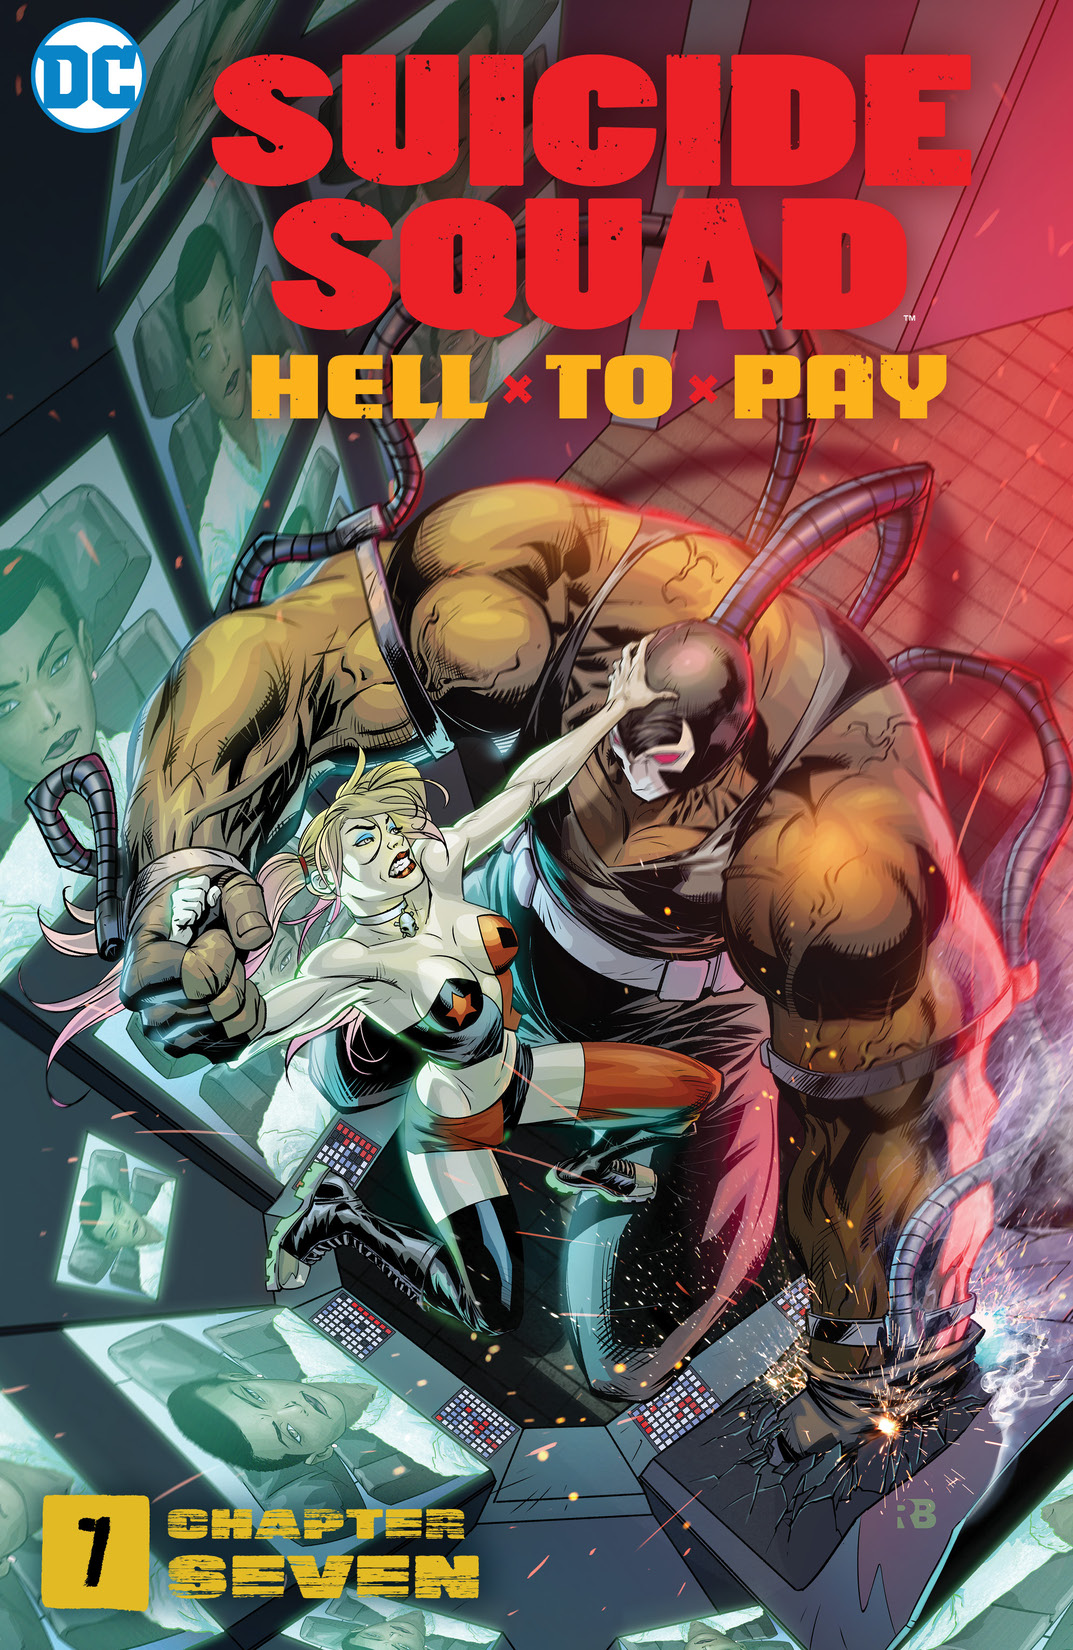 Suicide Squad: Hell to Pay #7 preview images